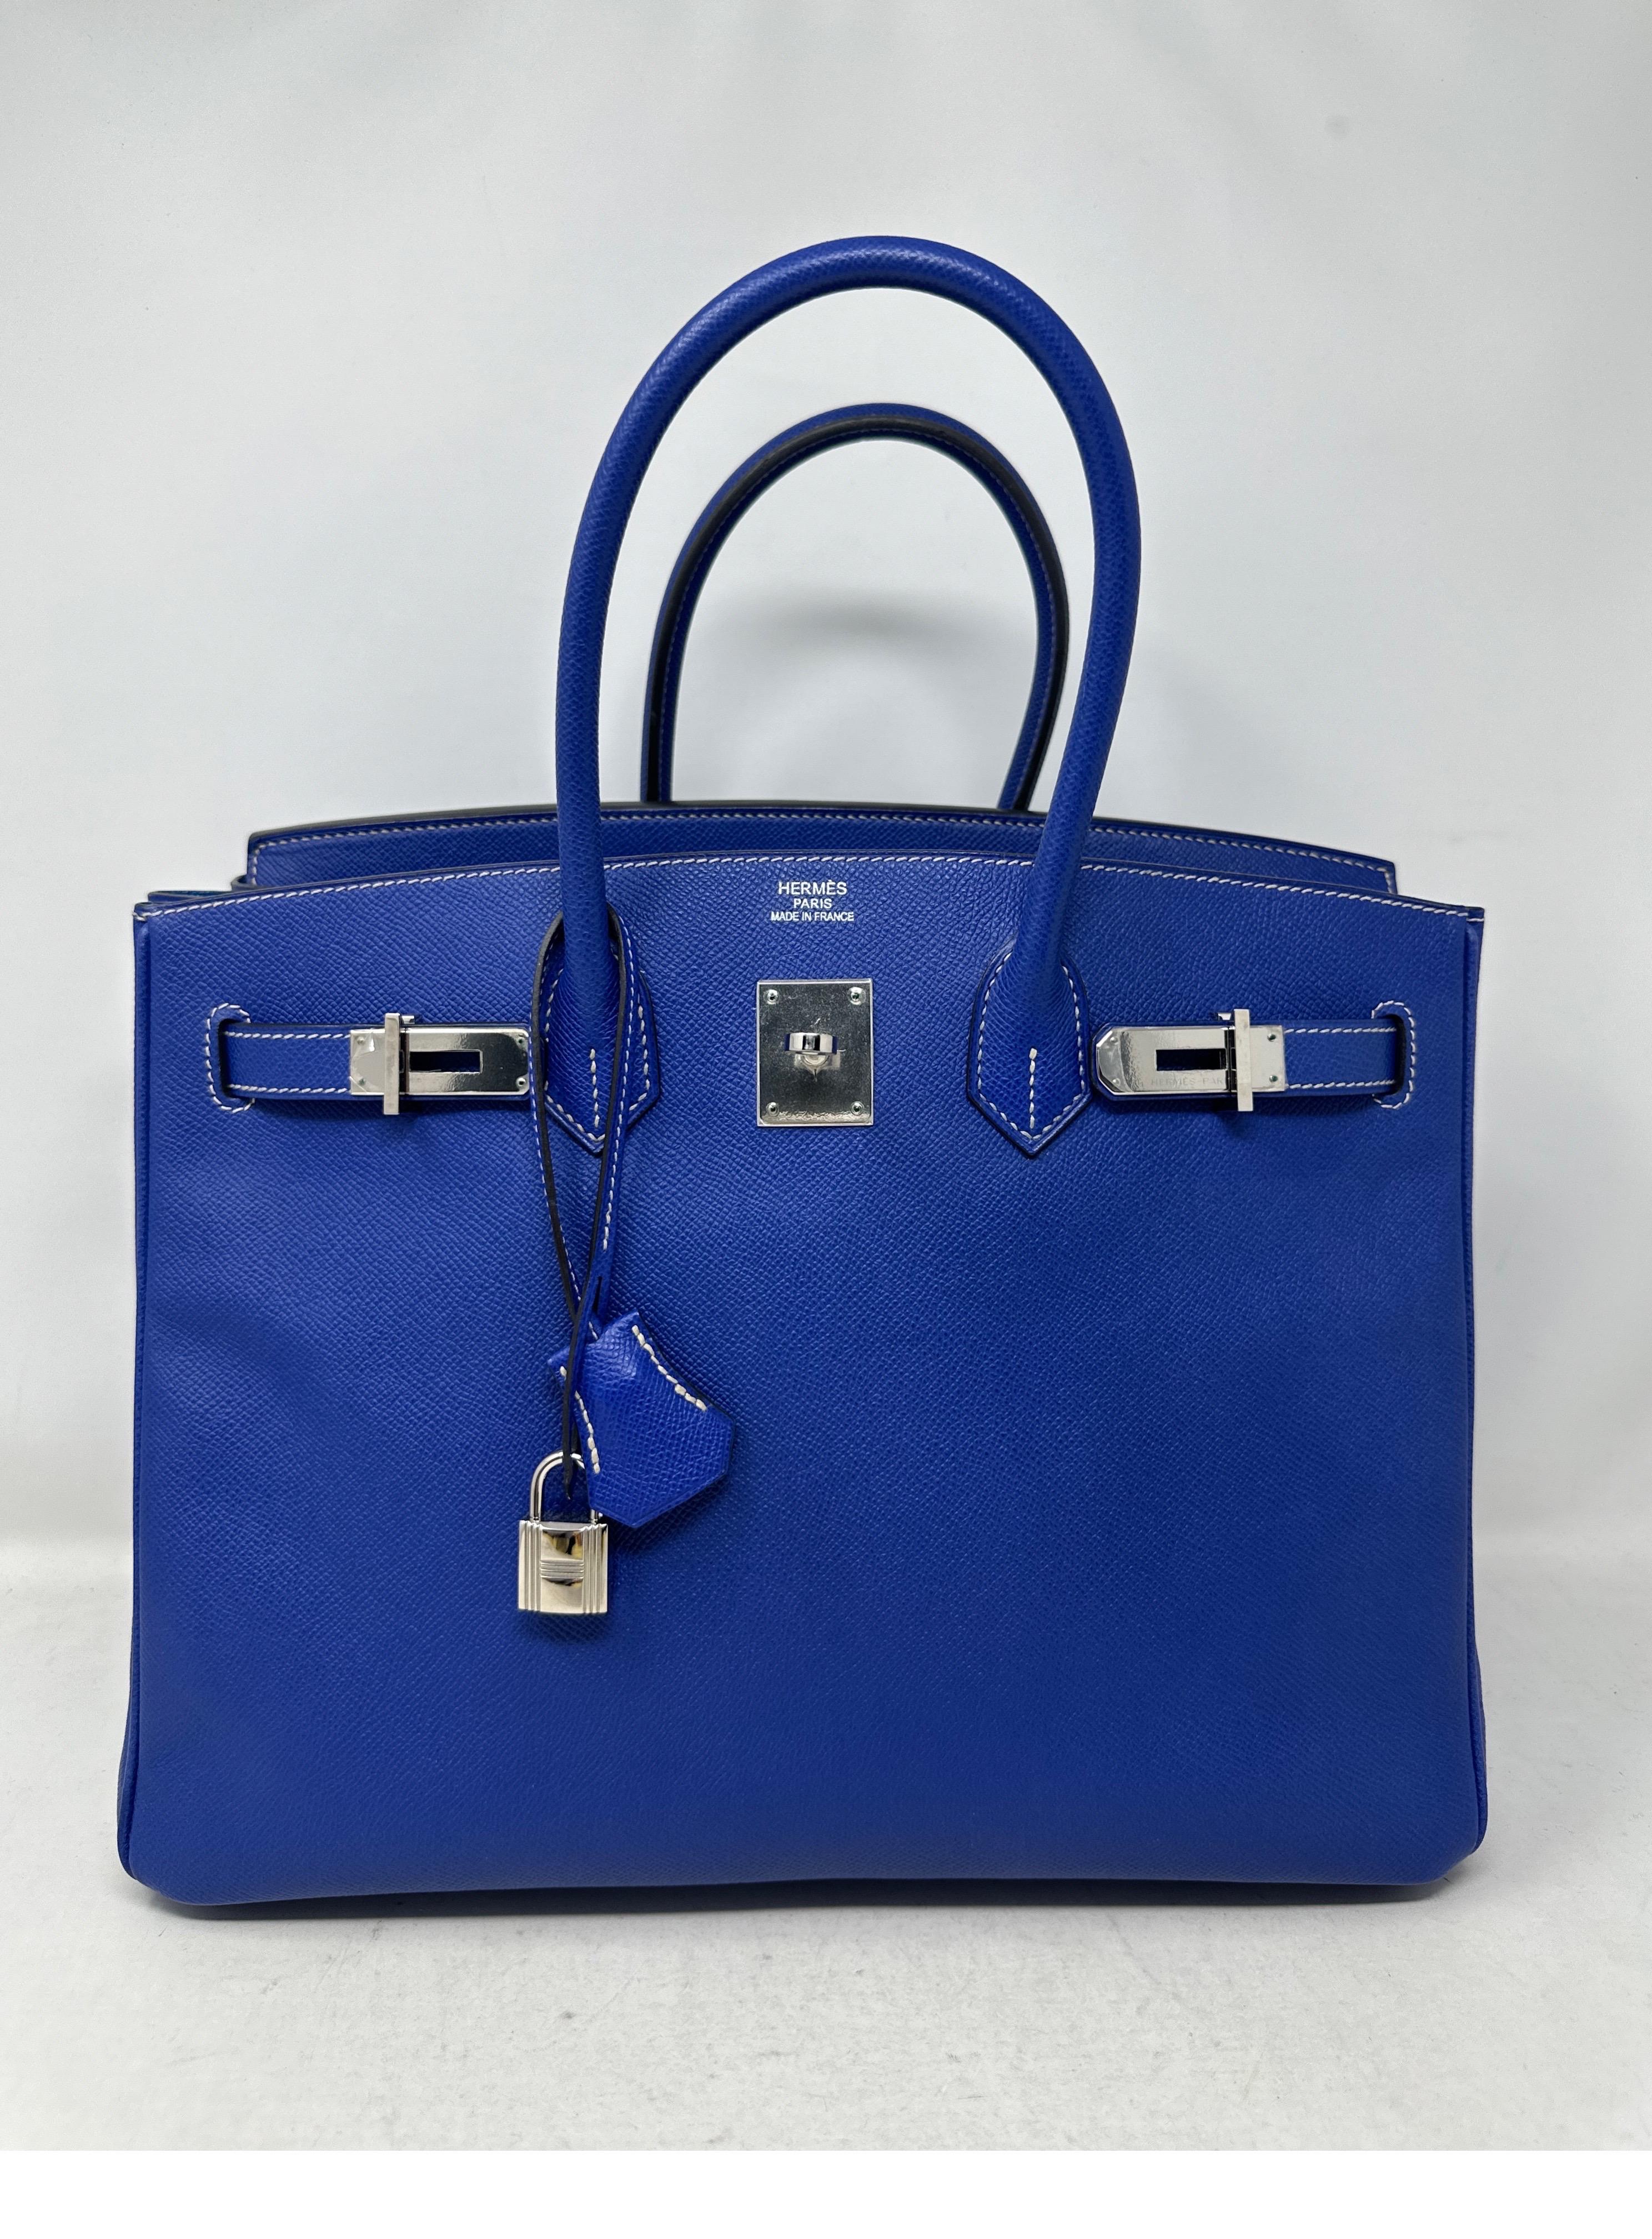 Hermes Blue Electrique Birkin 35 Bag. Palladium silver hardware. Epsom leather. Candy Birkin. Interior blue mykonos and exterior color is blue electrique. Excellent condition. Plastic is still on the hardware. Includes clochette, lock, keys, and